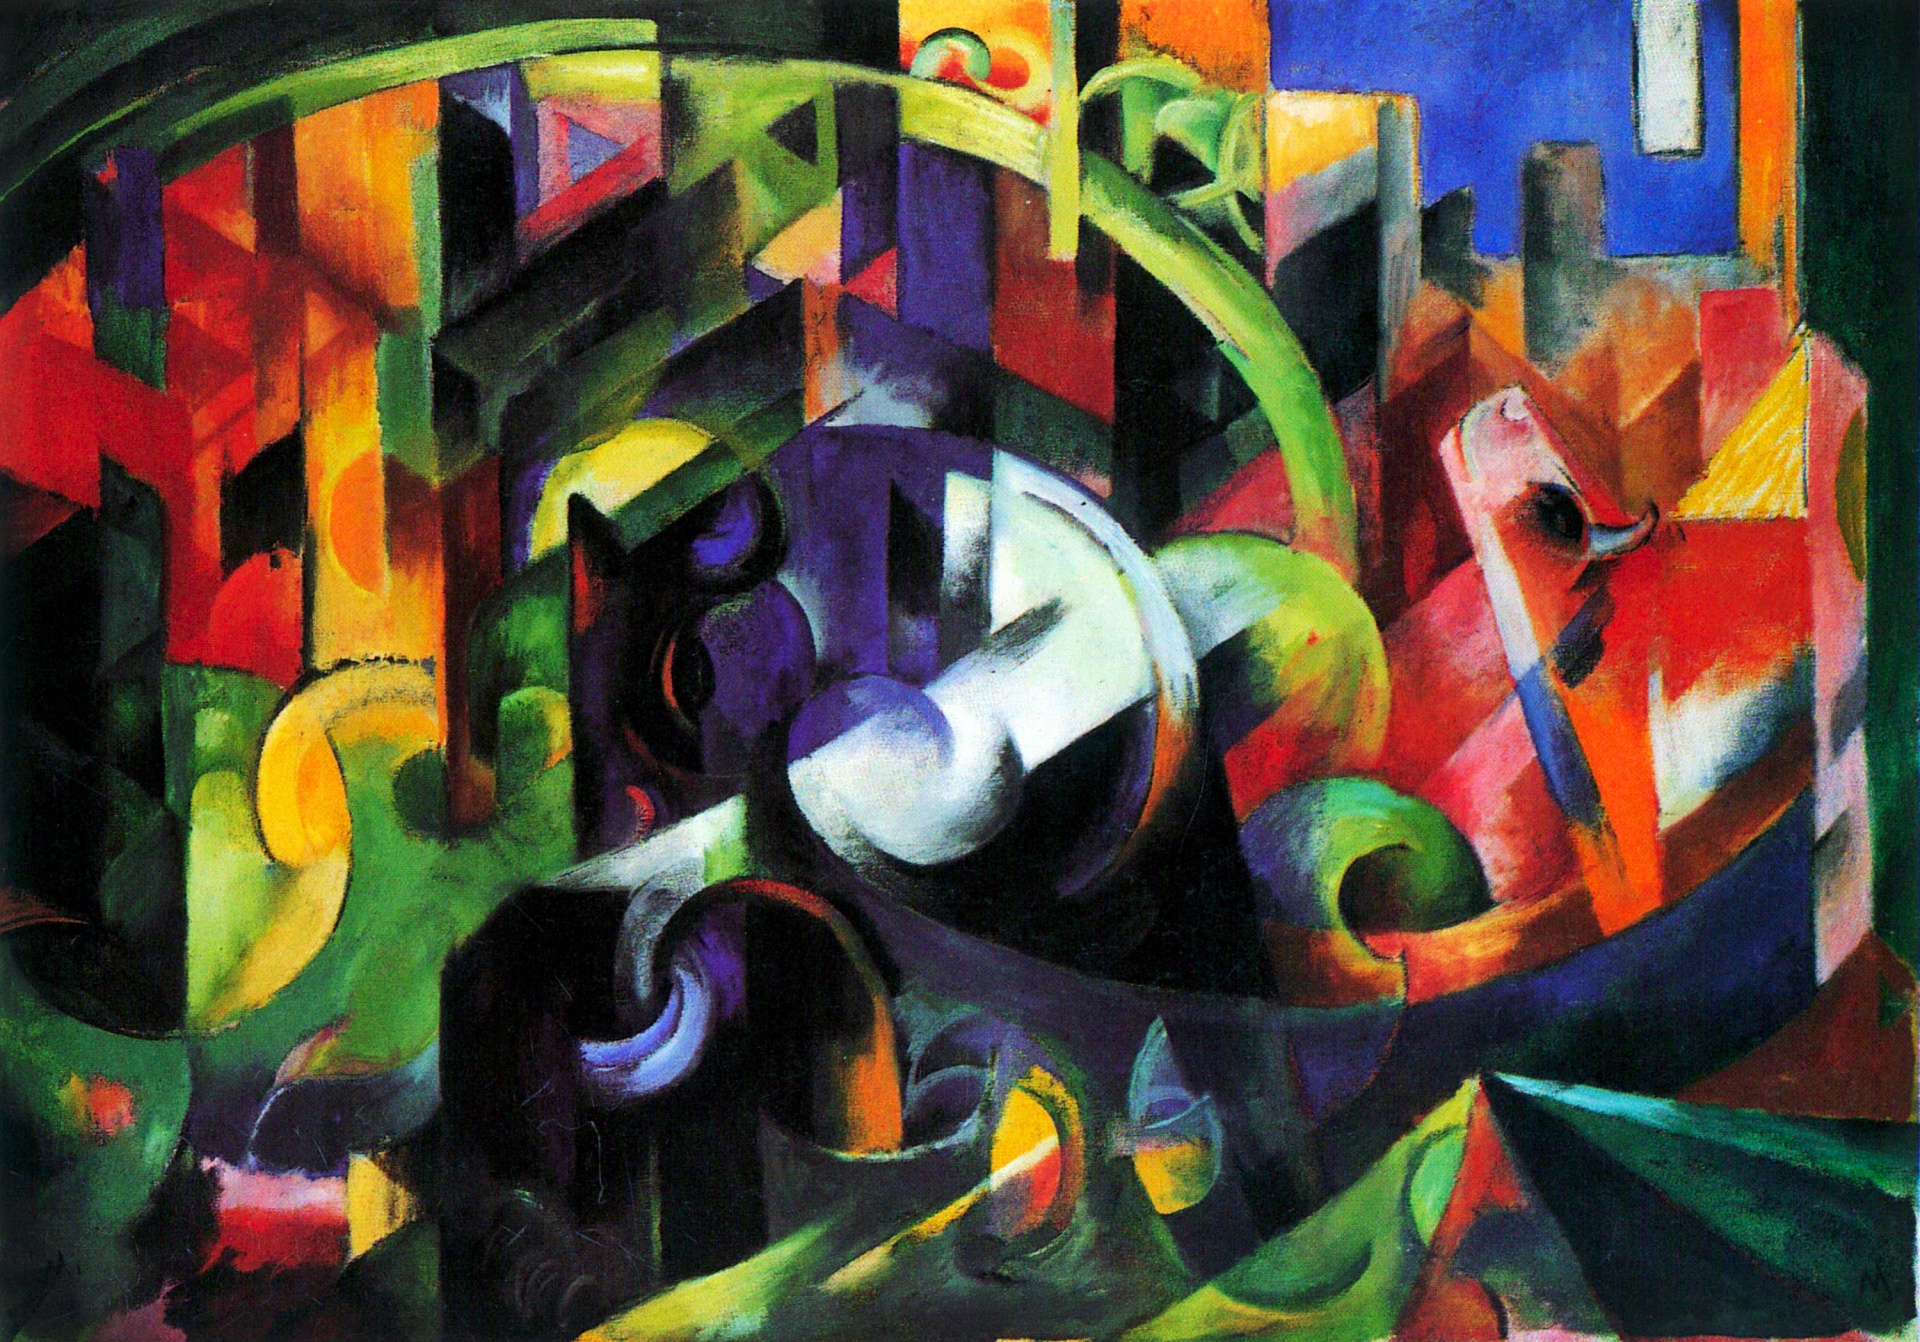 franz marc abstract abstract with cattle by franz marc free photo